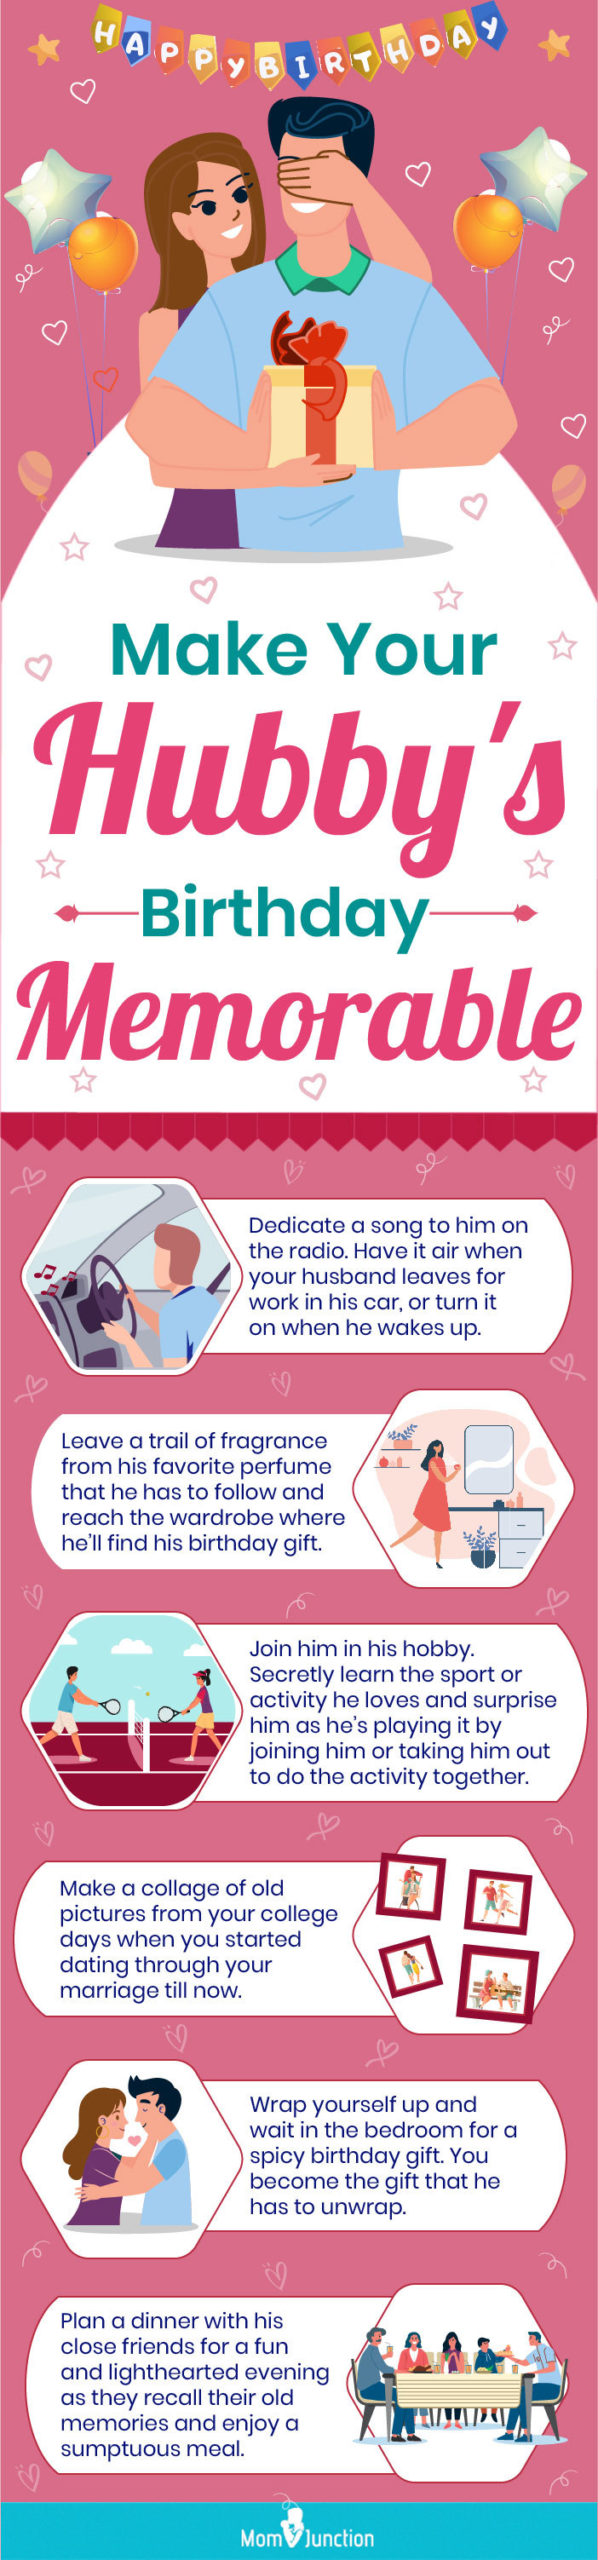 make your hubby s birthday memorable (infographic)